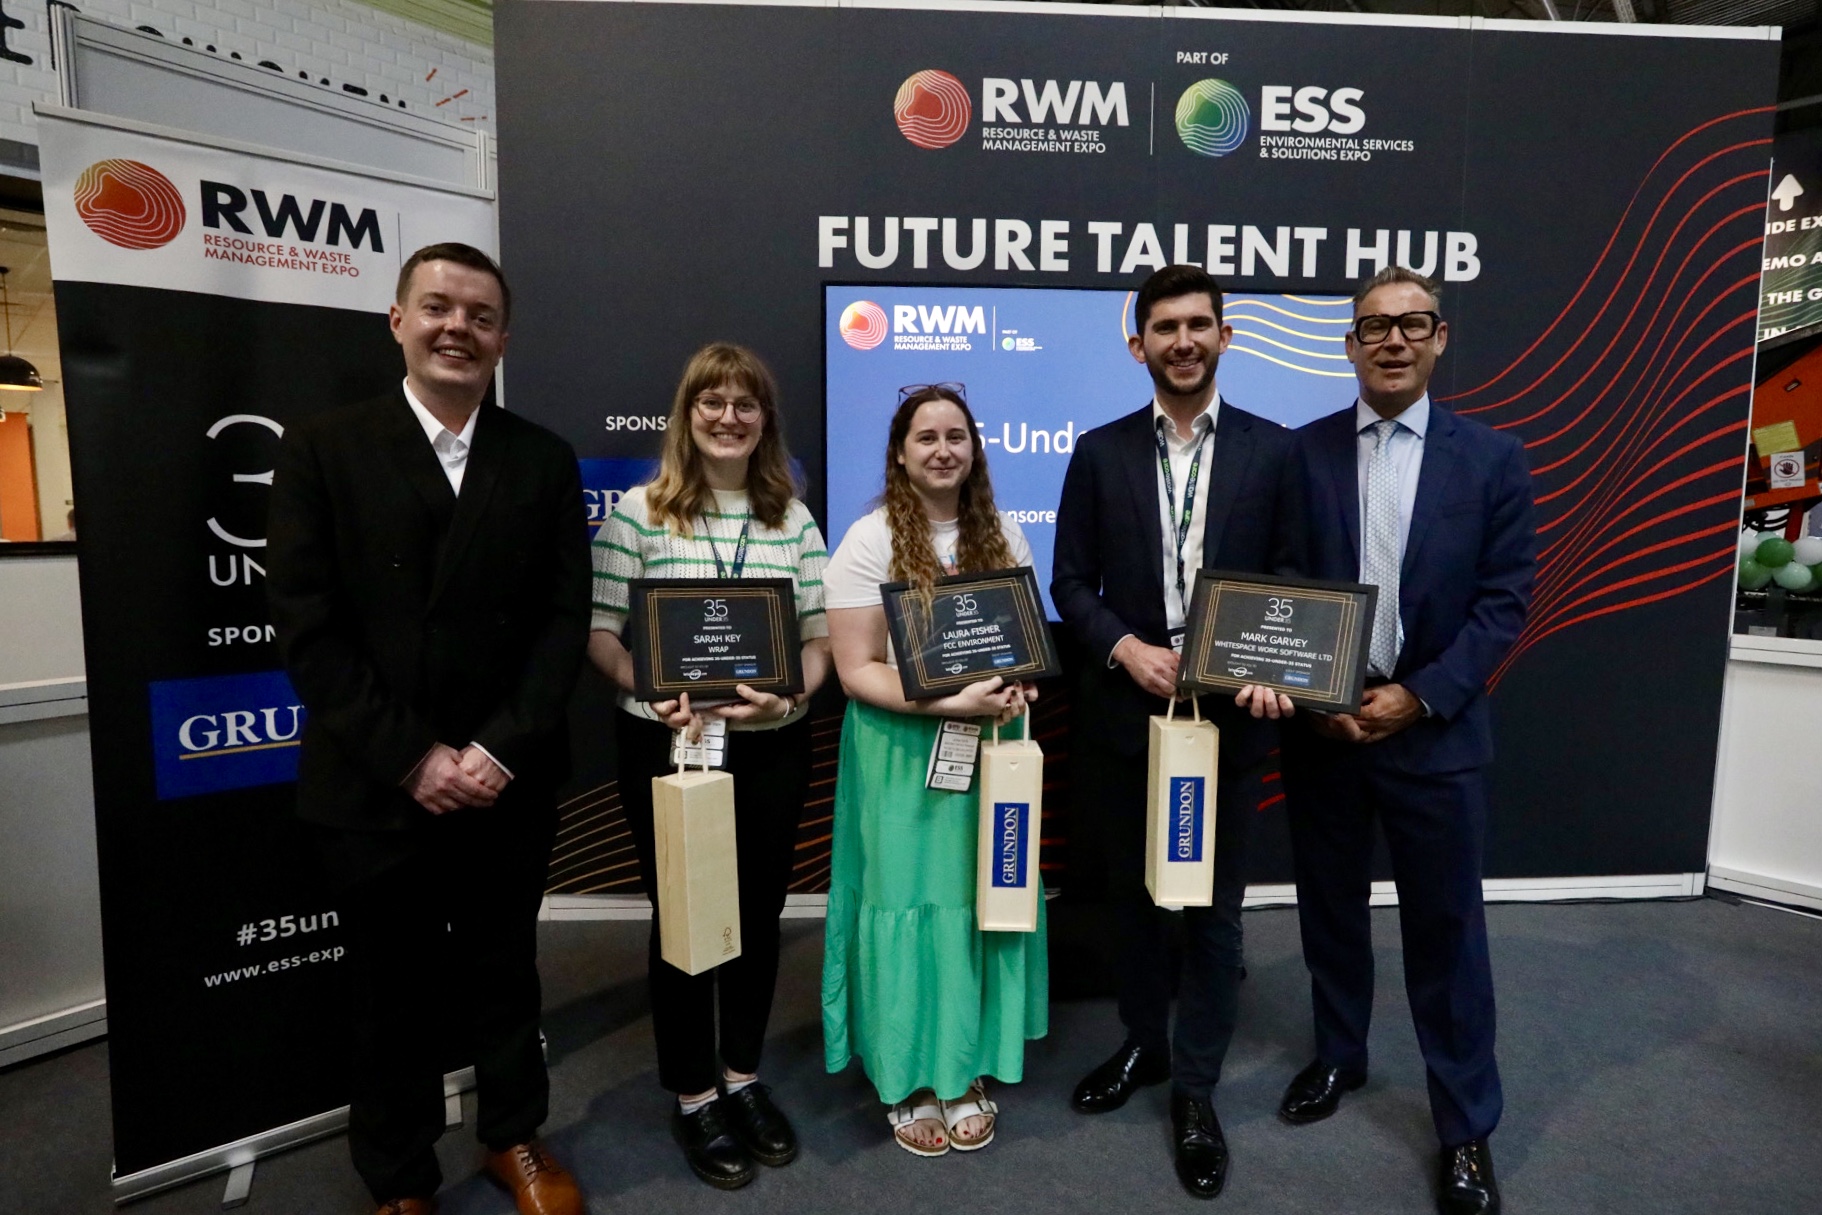 (From left to right) Joshua Doherty, editor of letsrecycle.com joined the top three 35 Under 35 status holders Sarah Key, WRAP; Laura Fisher, FCC Environment; and Mark Garvey, Whitespace Work Software Ltd; along with Neil Grundon